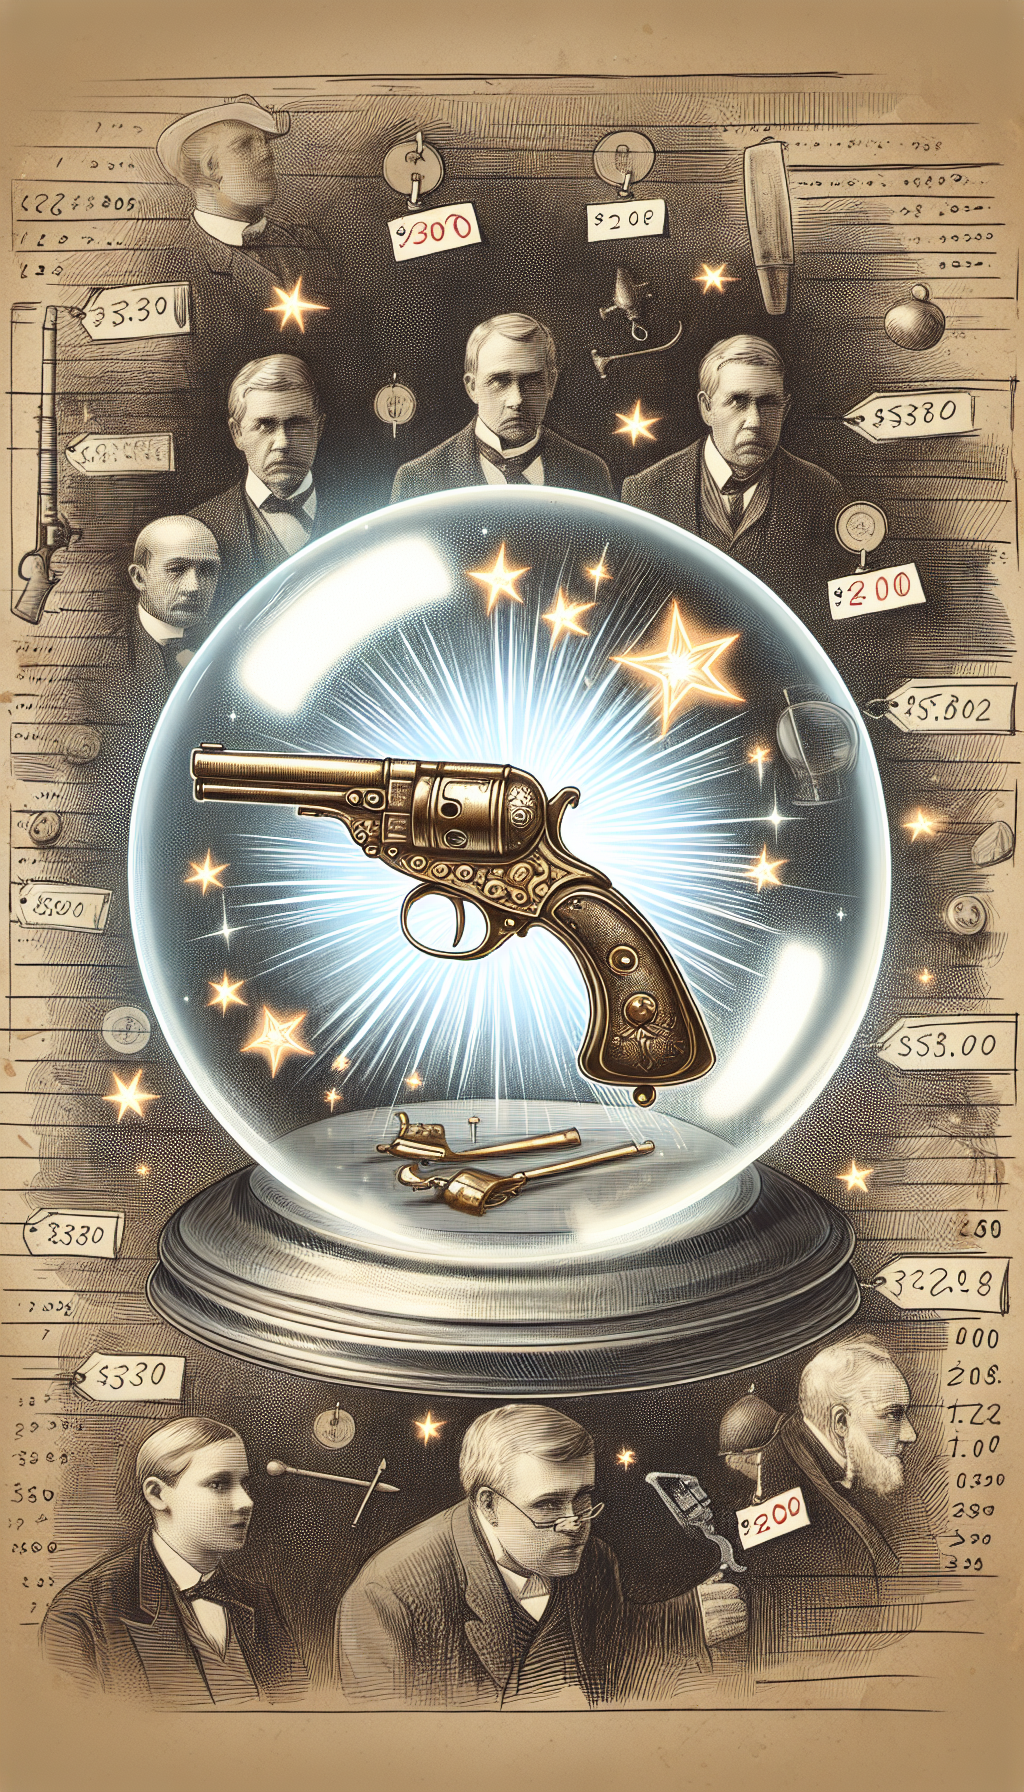 The illustration displays a pristine Victorian-era toy gun encased in a translucent bubble, with glowing rarity stars and inquisitive eyes of collectors etched in the background. Surrounding the bubble, a muted auction gavel and faded price tags in varying styles symbolize fluctuating values and demand for such antique treasures.